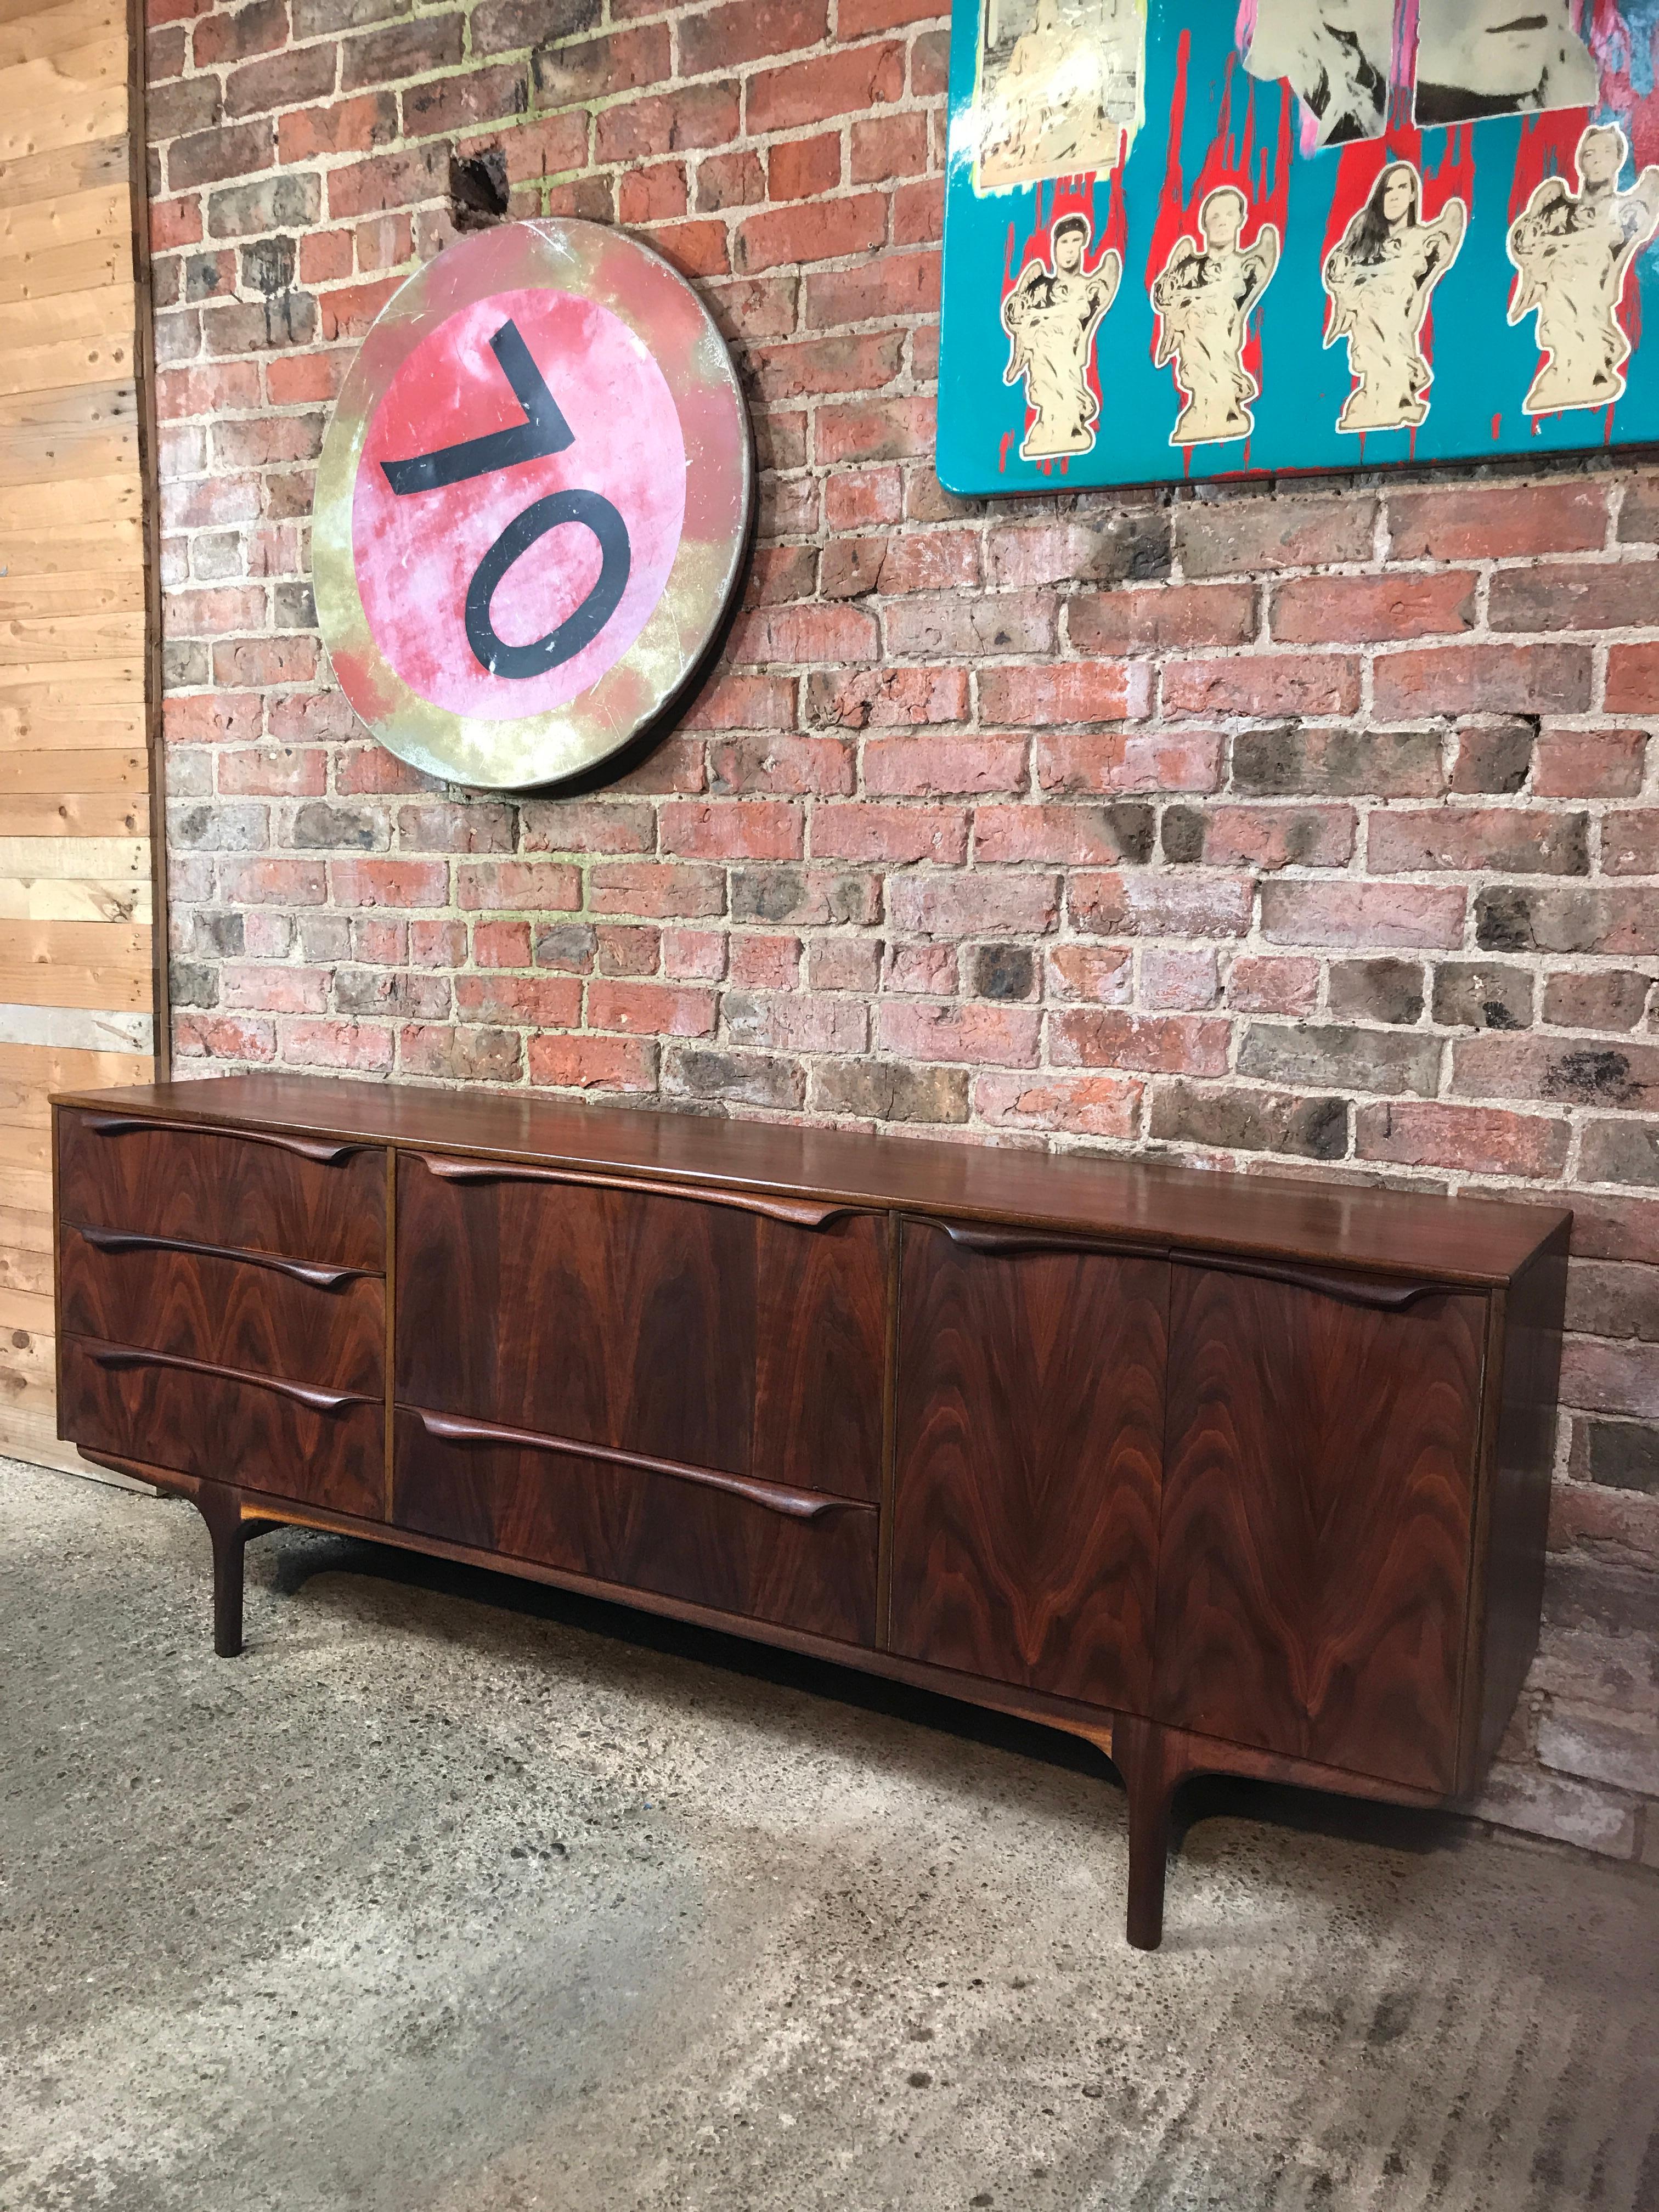 Sought After black walnut 1950 Sutcliffe Retro vintage sideboard
Lots of storage space, it has 4 drawers one with a removable cuttlery drawer, cocktail cabinet and a large cupboard, it stands on solid teak legs.

Super condition, one of the best